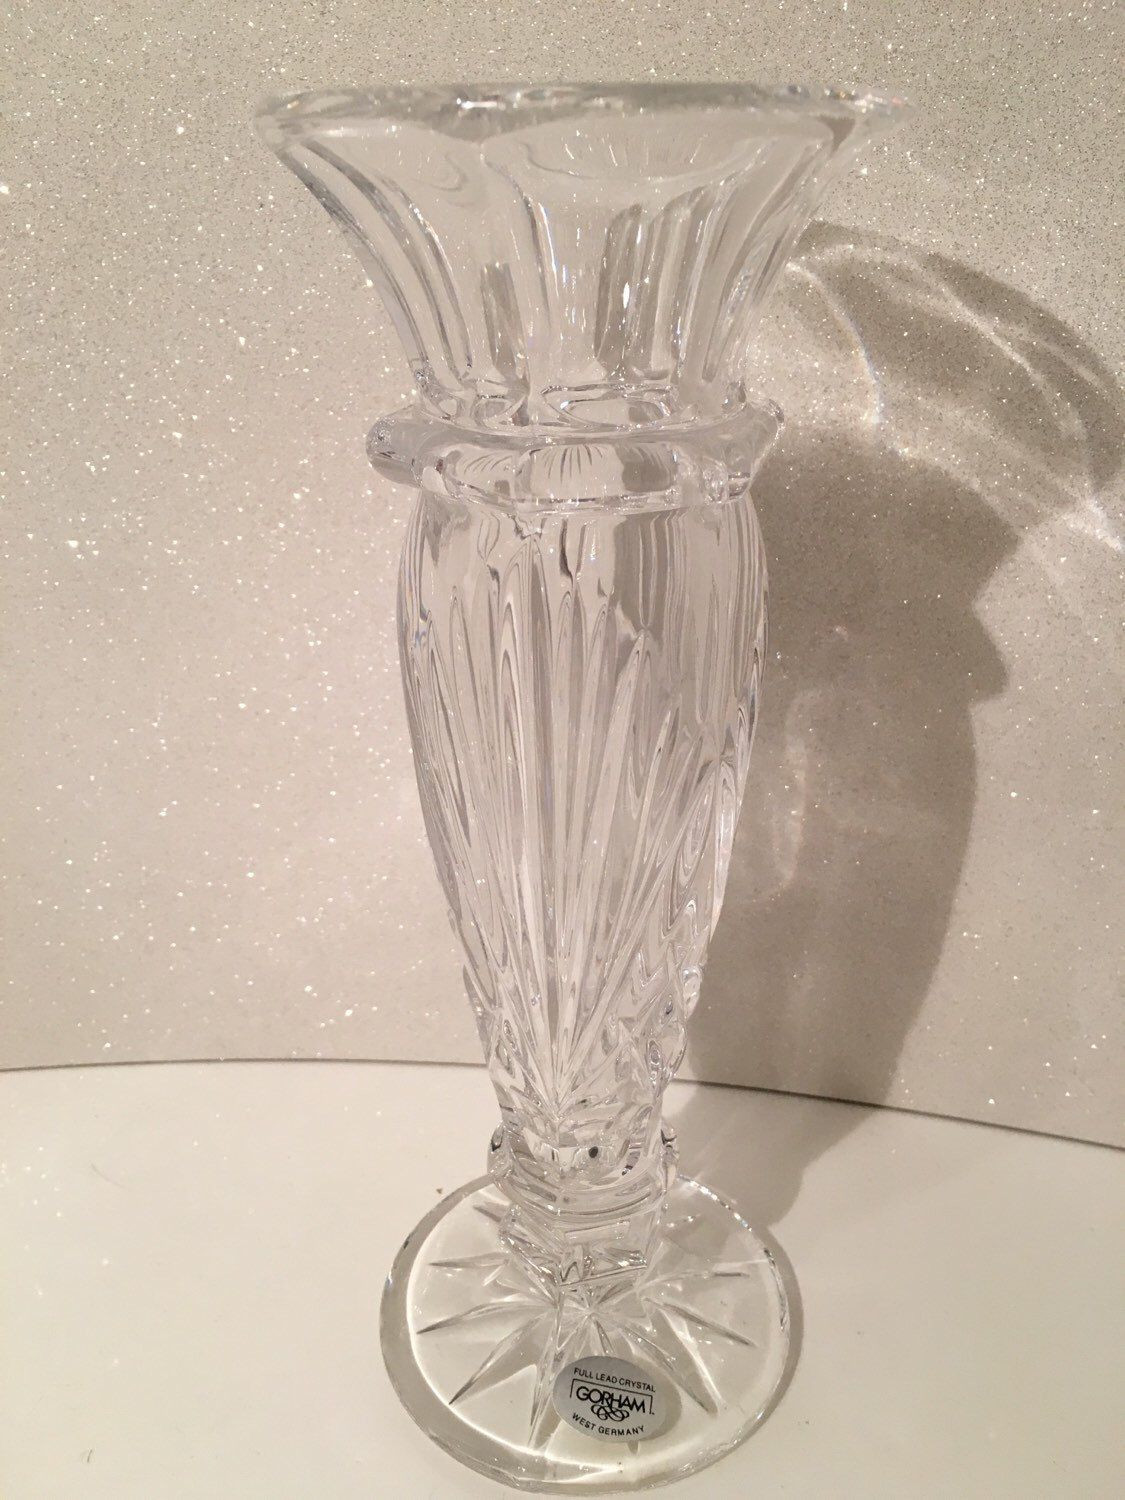 24 Fabulous Waterford Bud Vase 2024 free download waterford bud vase of a personal favorite from my etsy shop https www etsy com listing intended for a personal favorite from my etsy shop https www etsy com listing 260337454 vintage gorham 